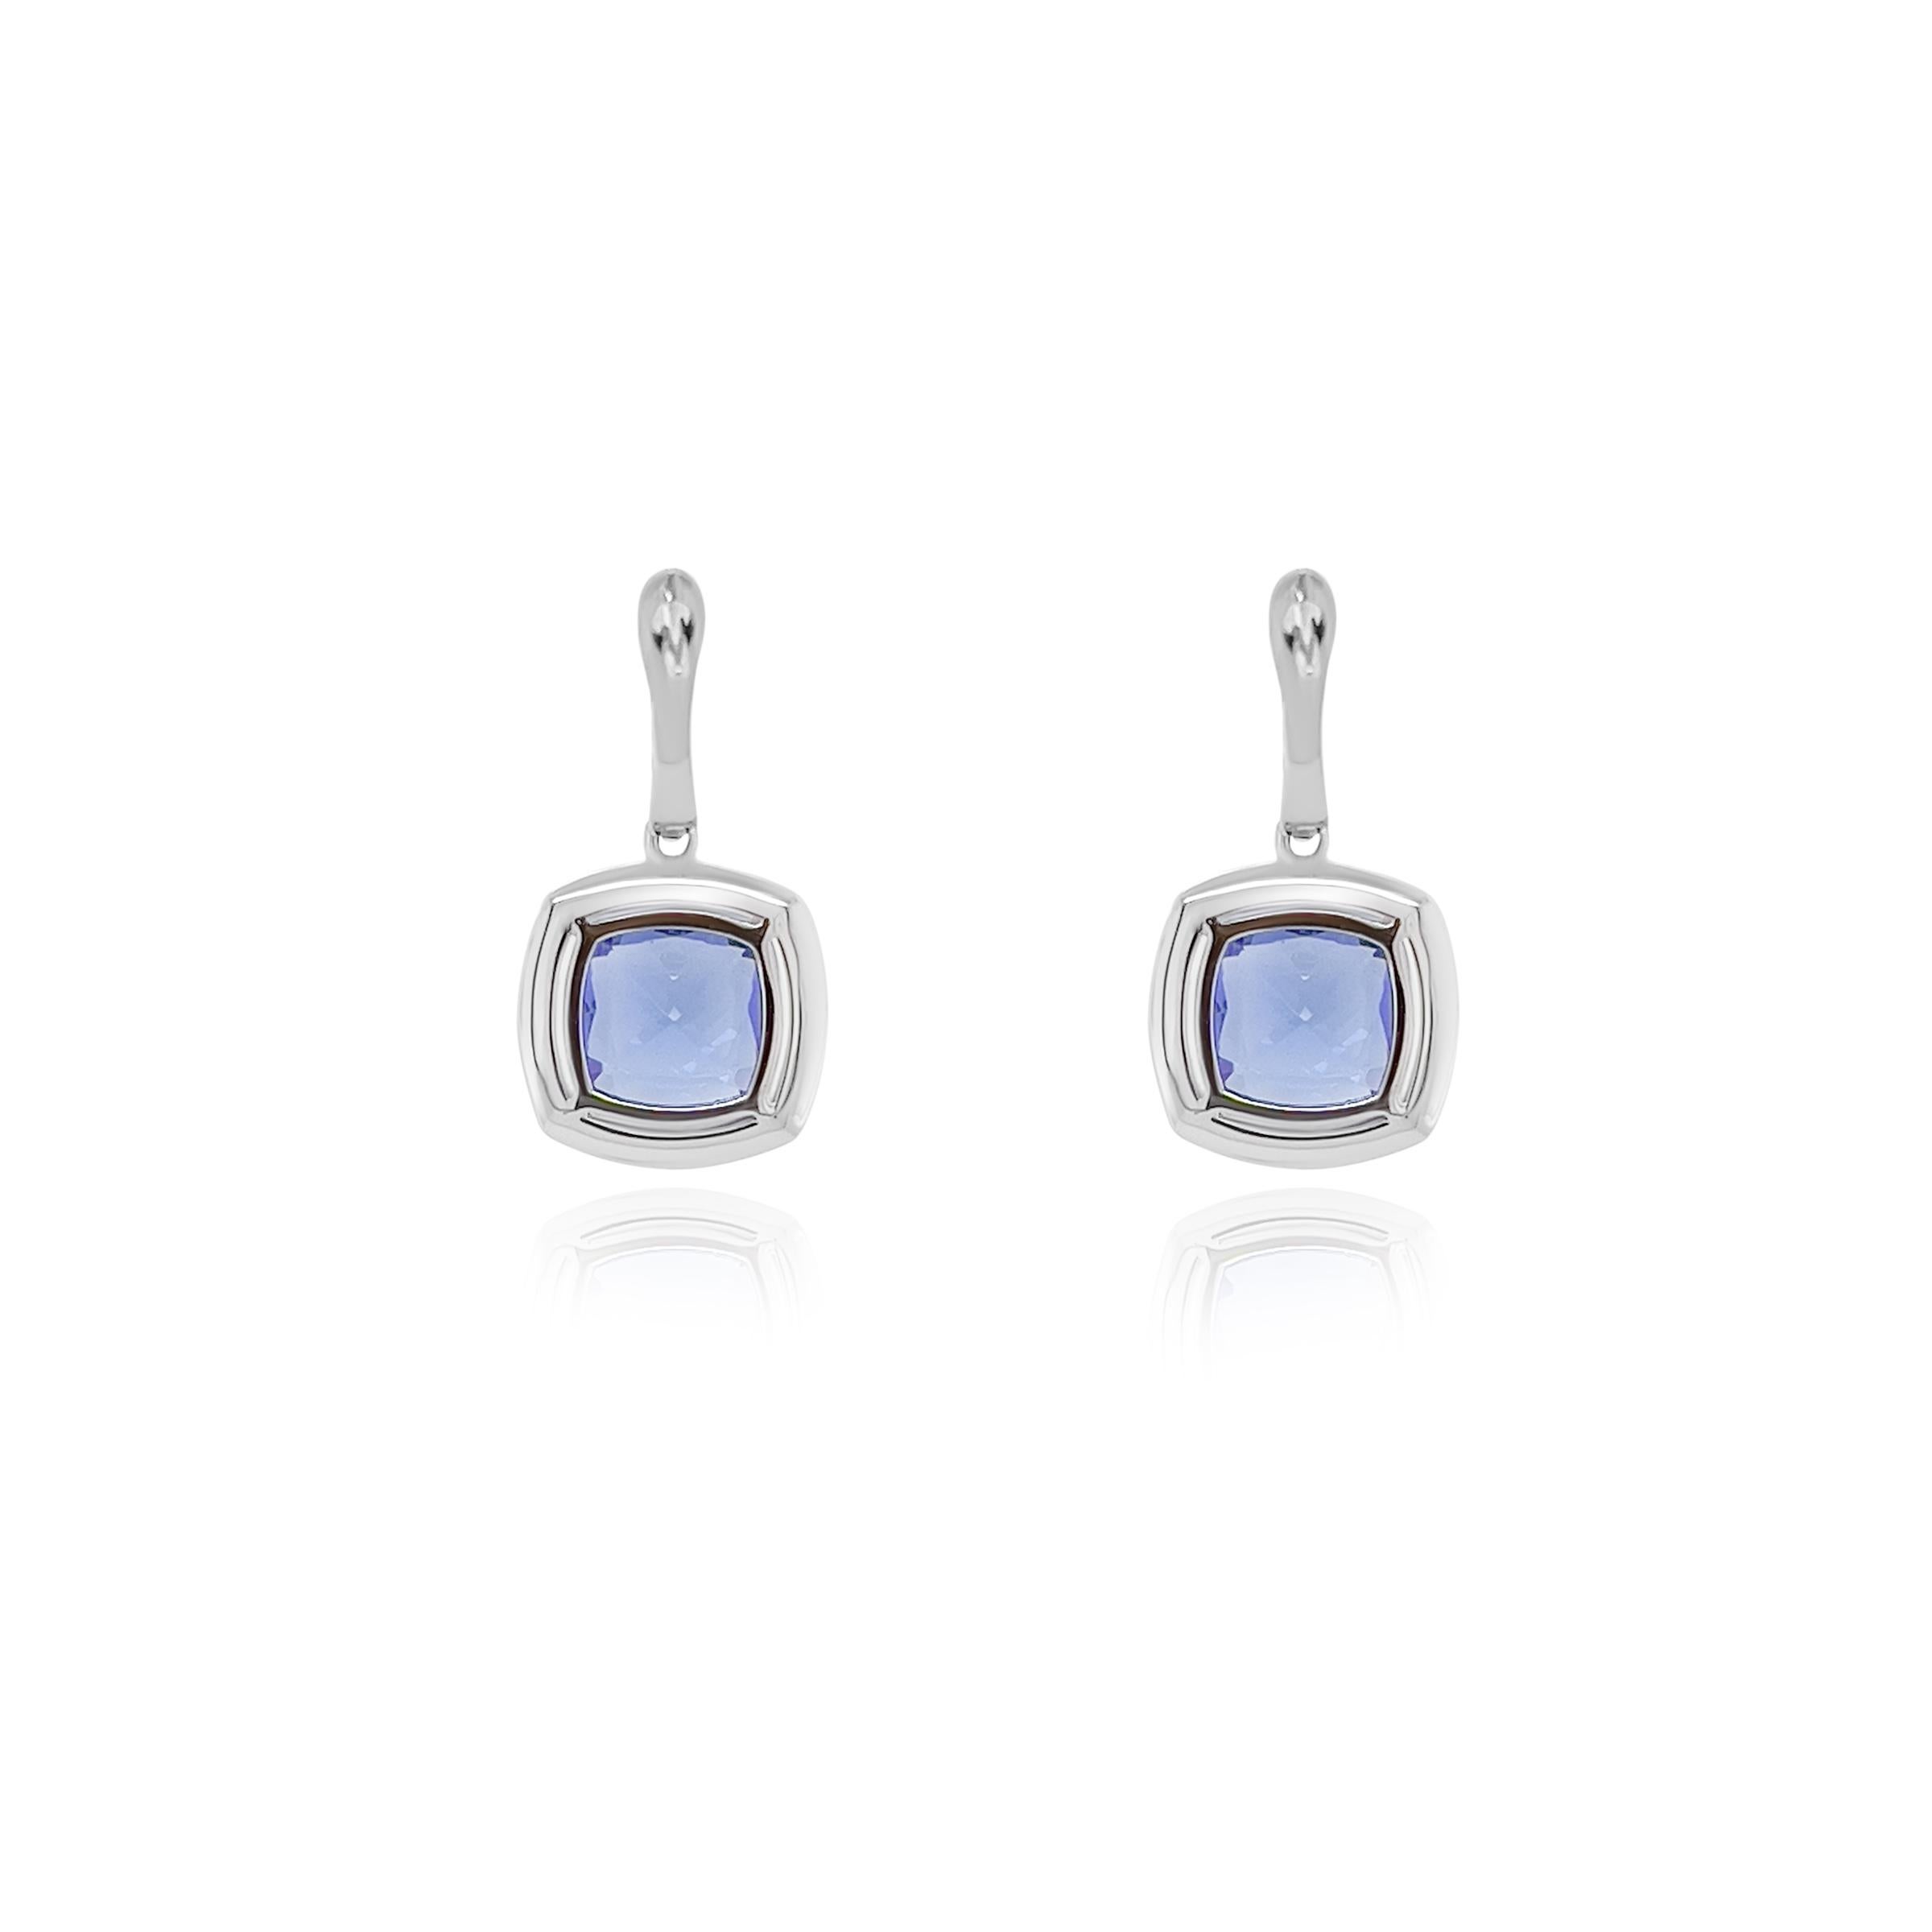 An exquisite pair of tanzanite and diamond earrings, the epitome of luxury and elegance. These stunning earrings feature clean and sparkling cushion cut tanzanite weighing a total of 4.180 carats. 

The vibrant tanzanites are magnificently